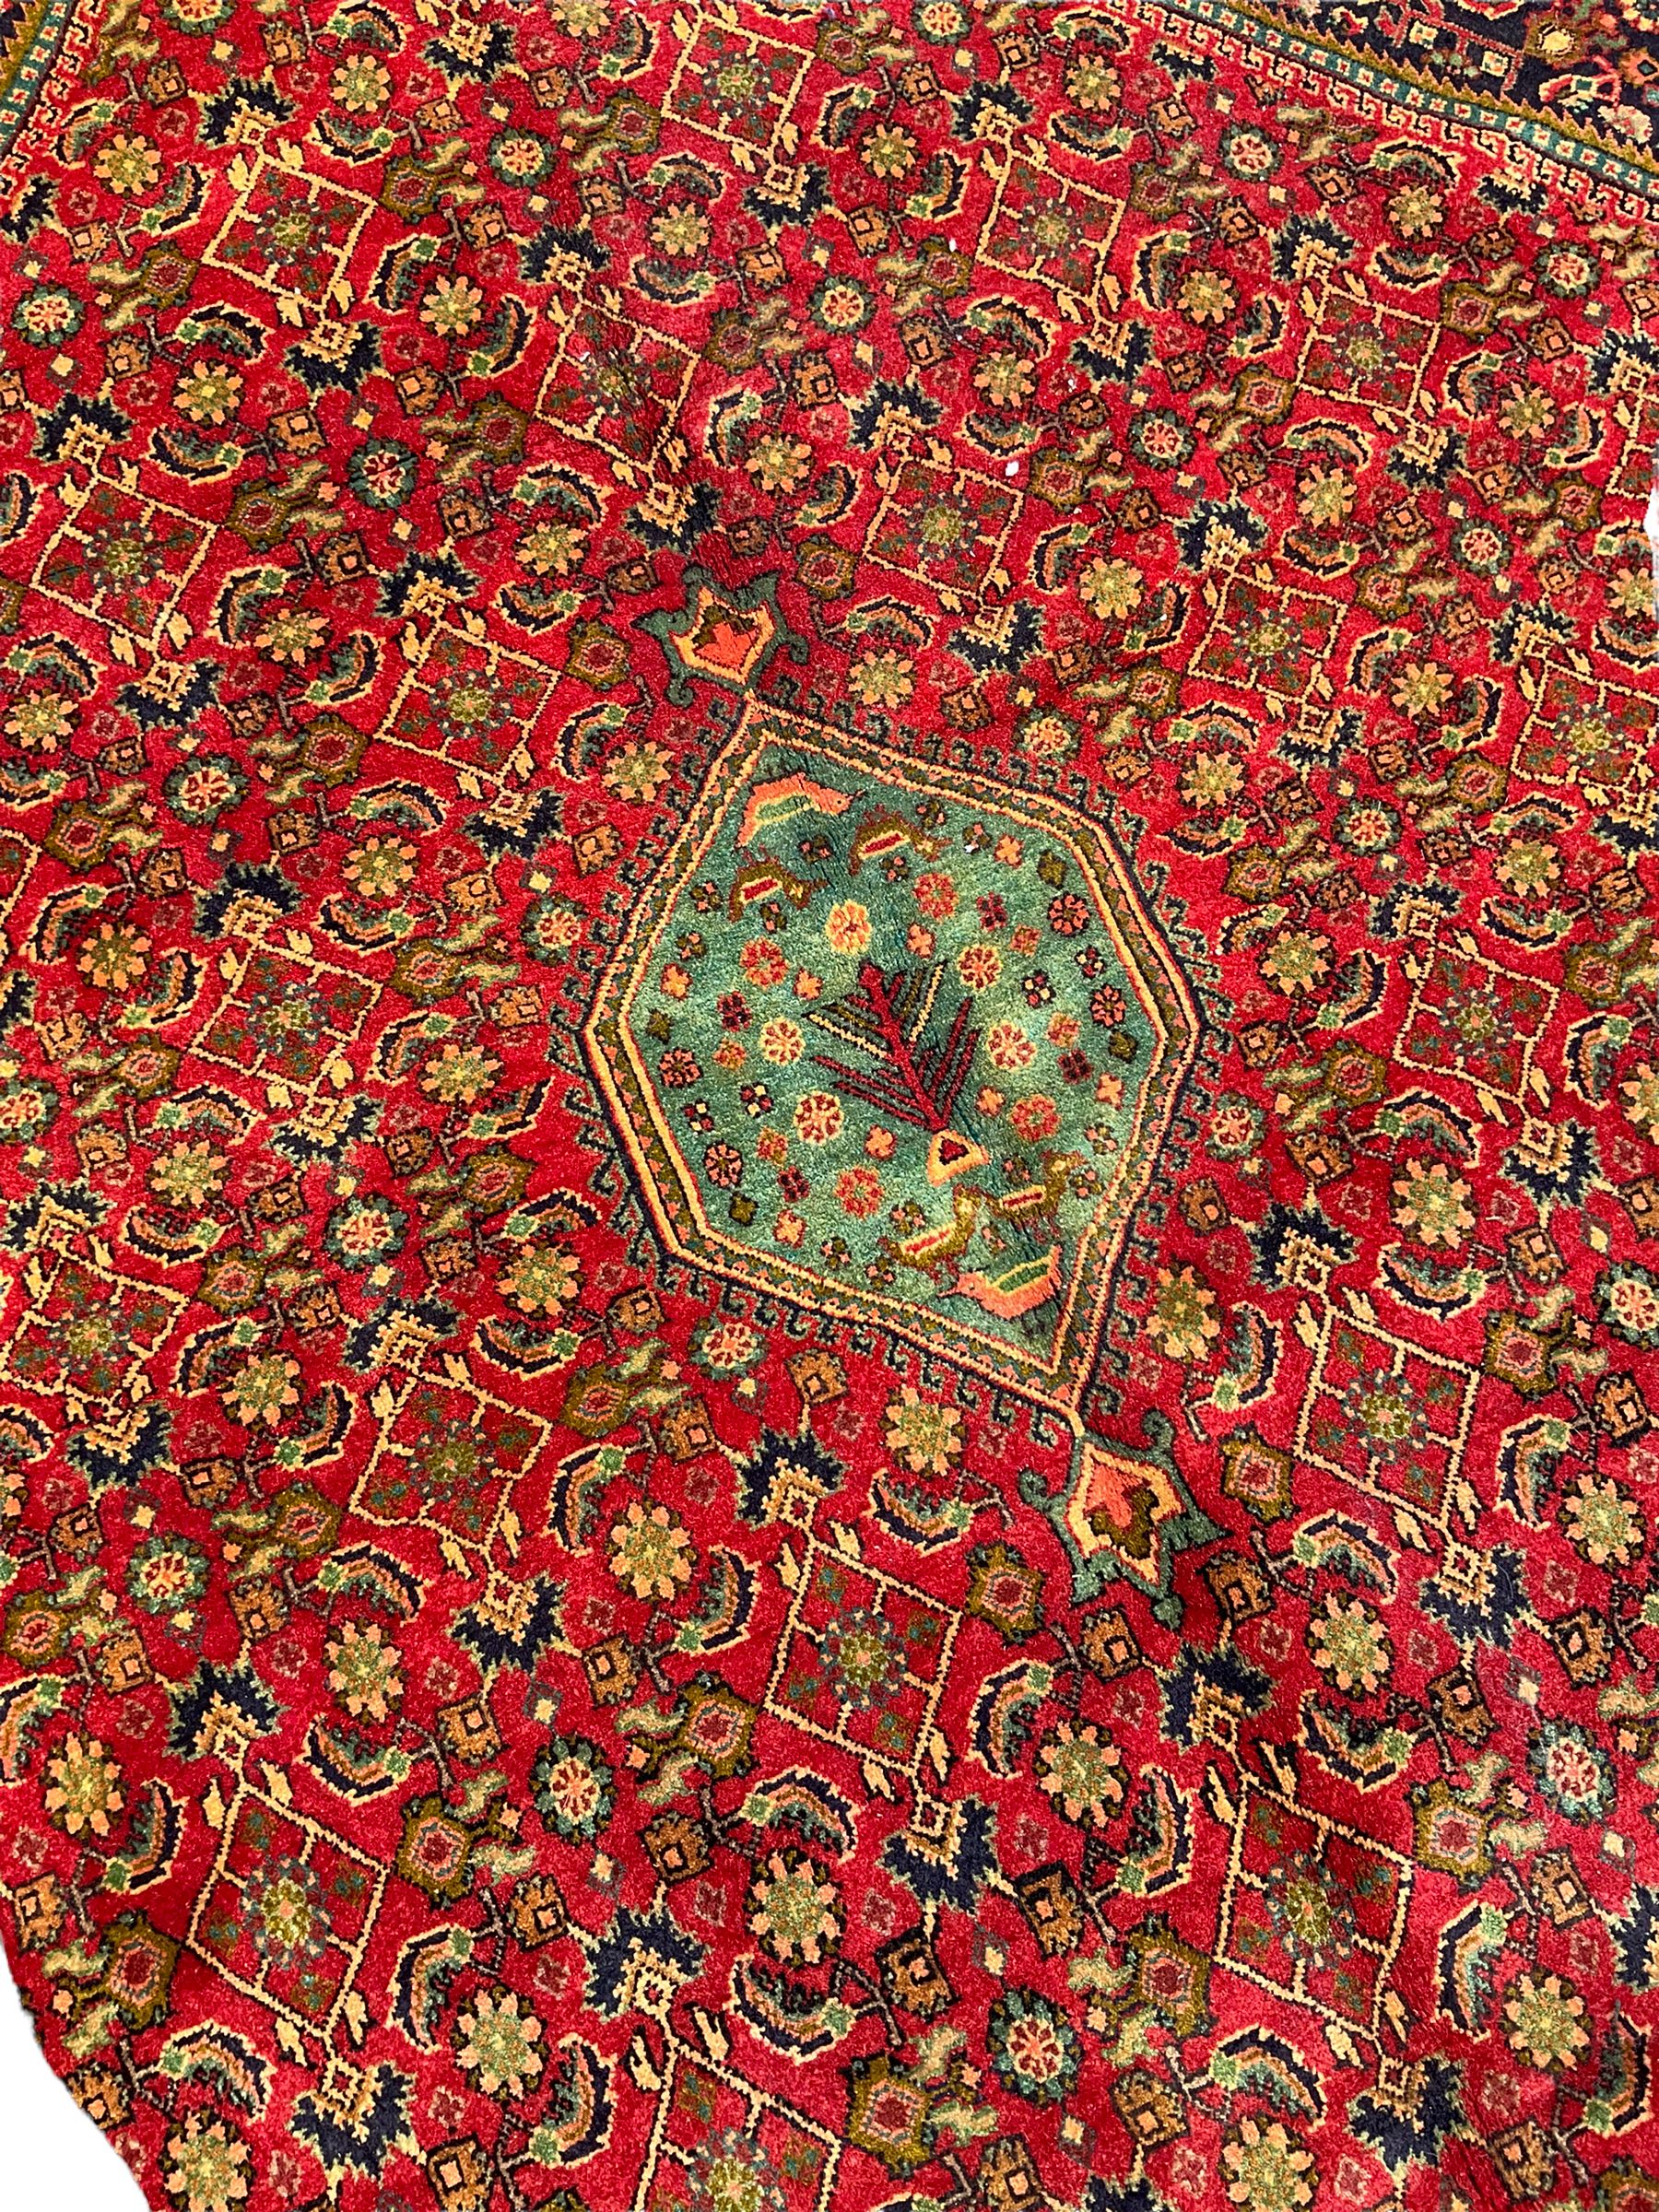 Persian Bijar red and blue ground rug - Image 4 of 6